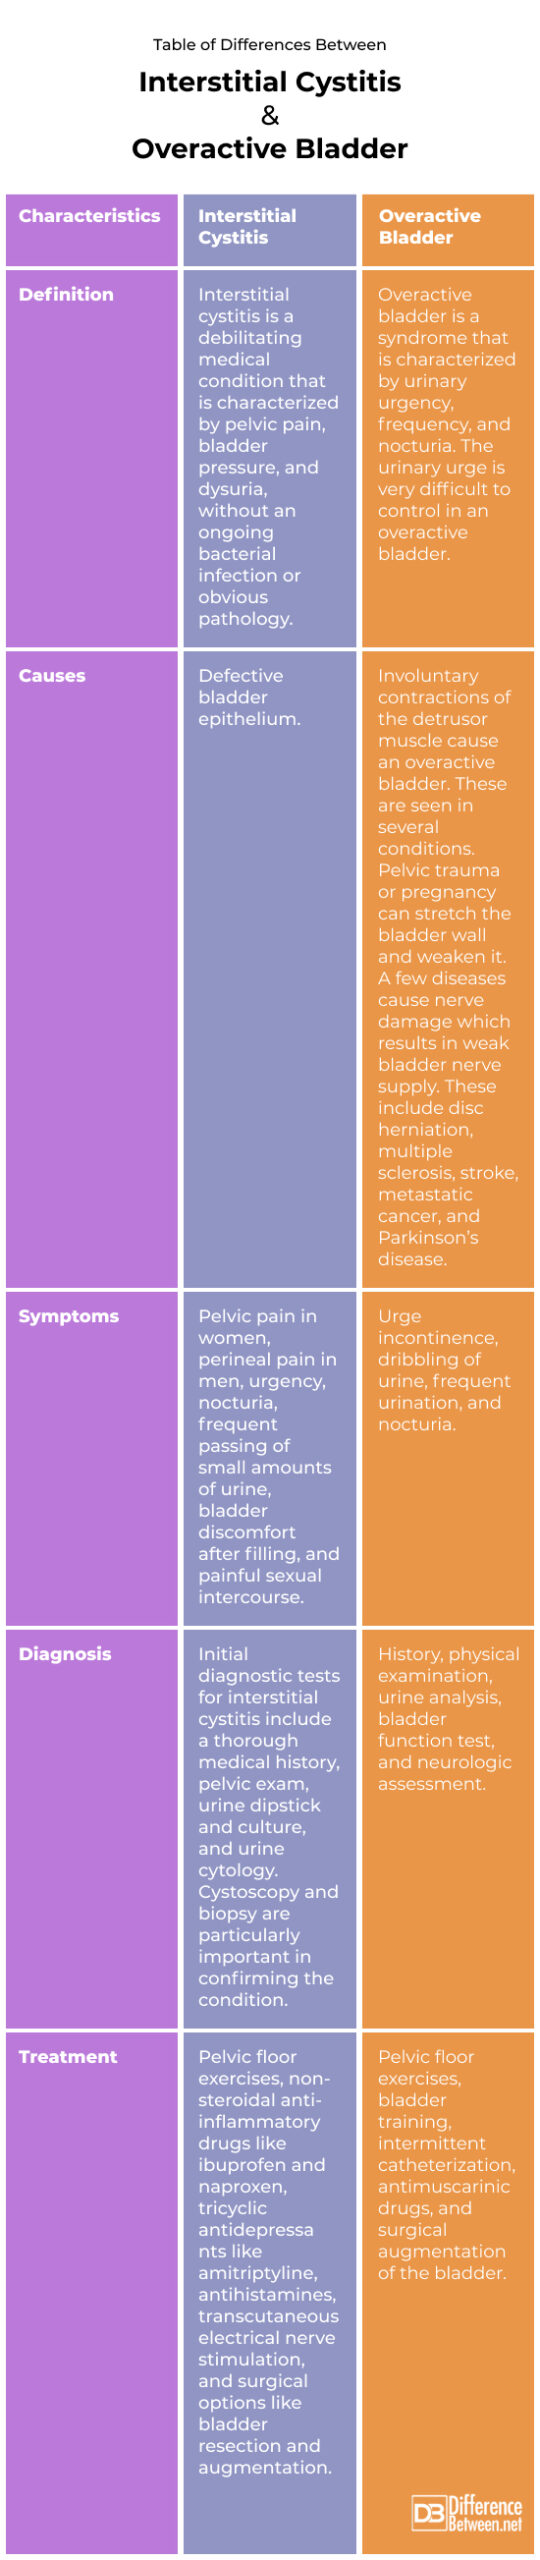 interstitial cystitis and overactive bladder